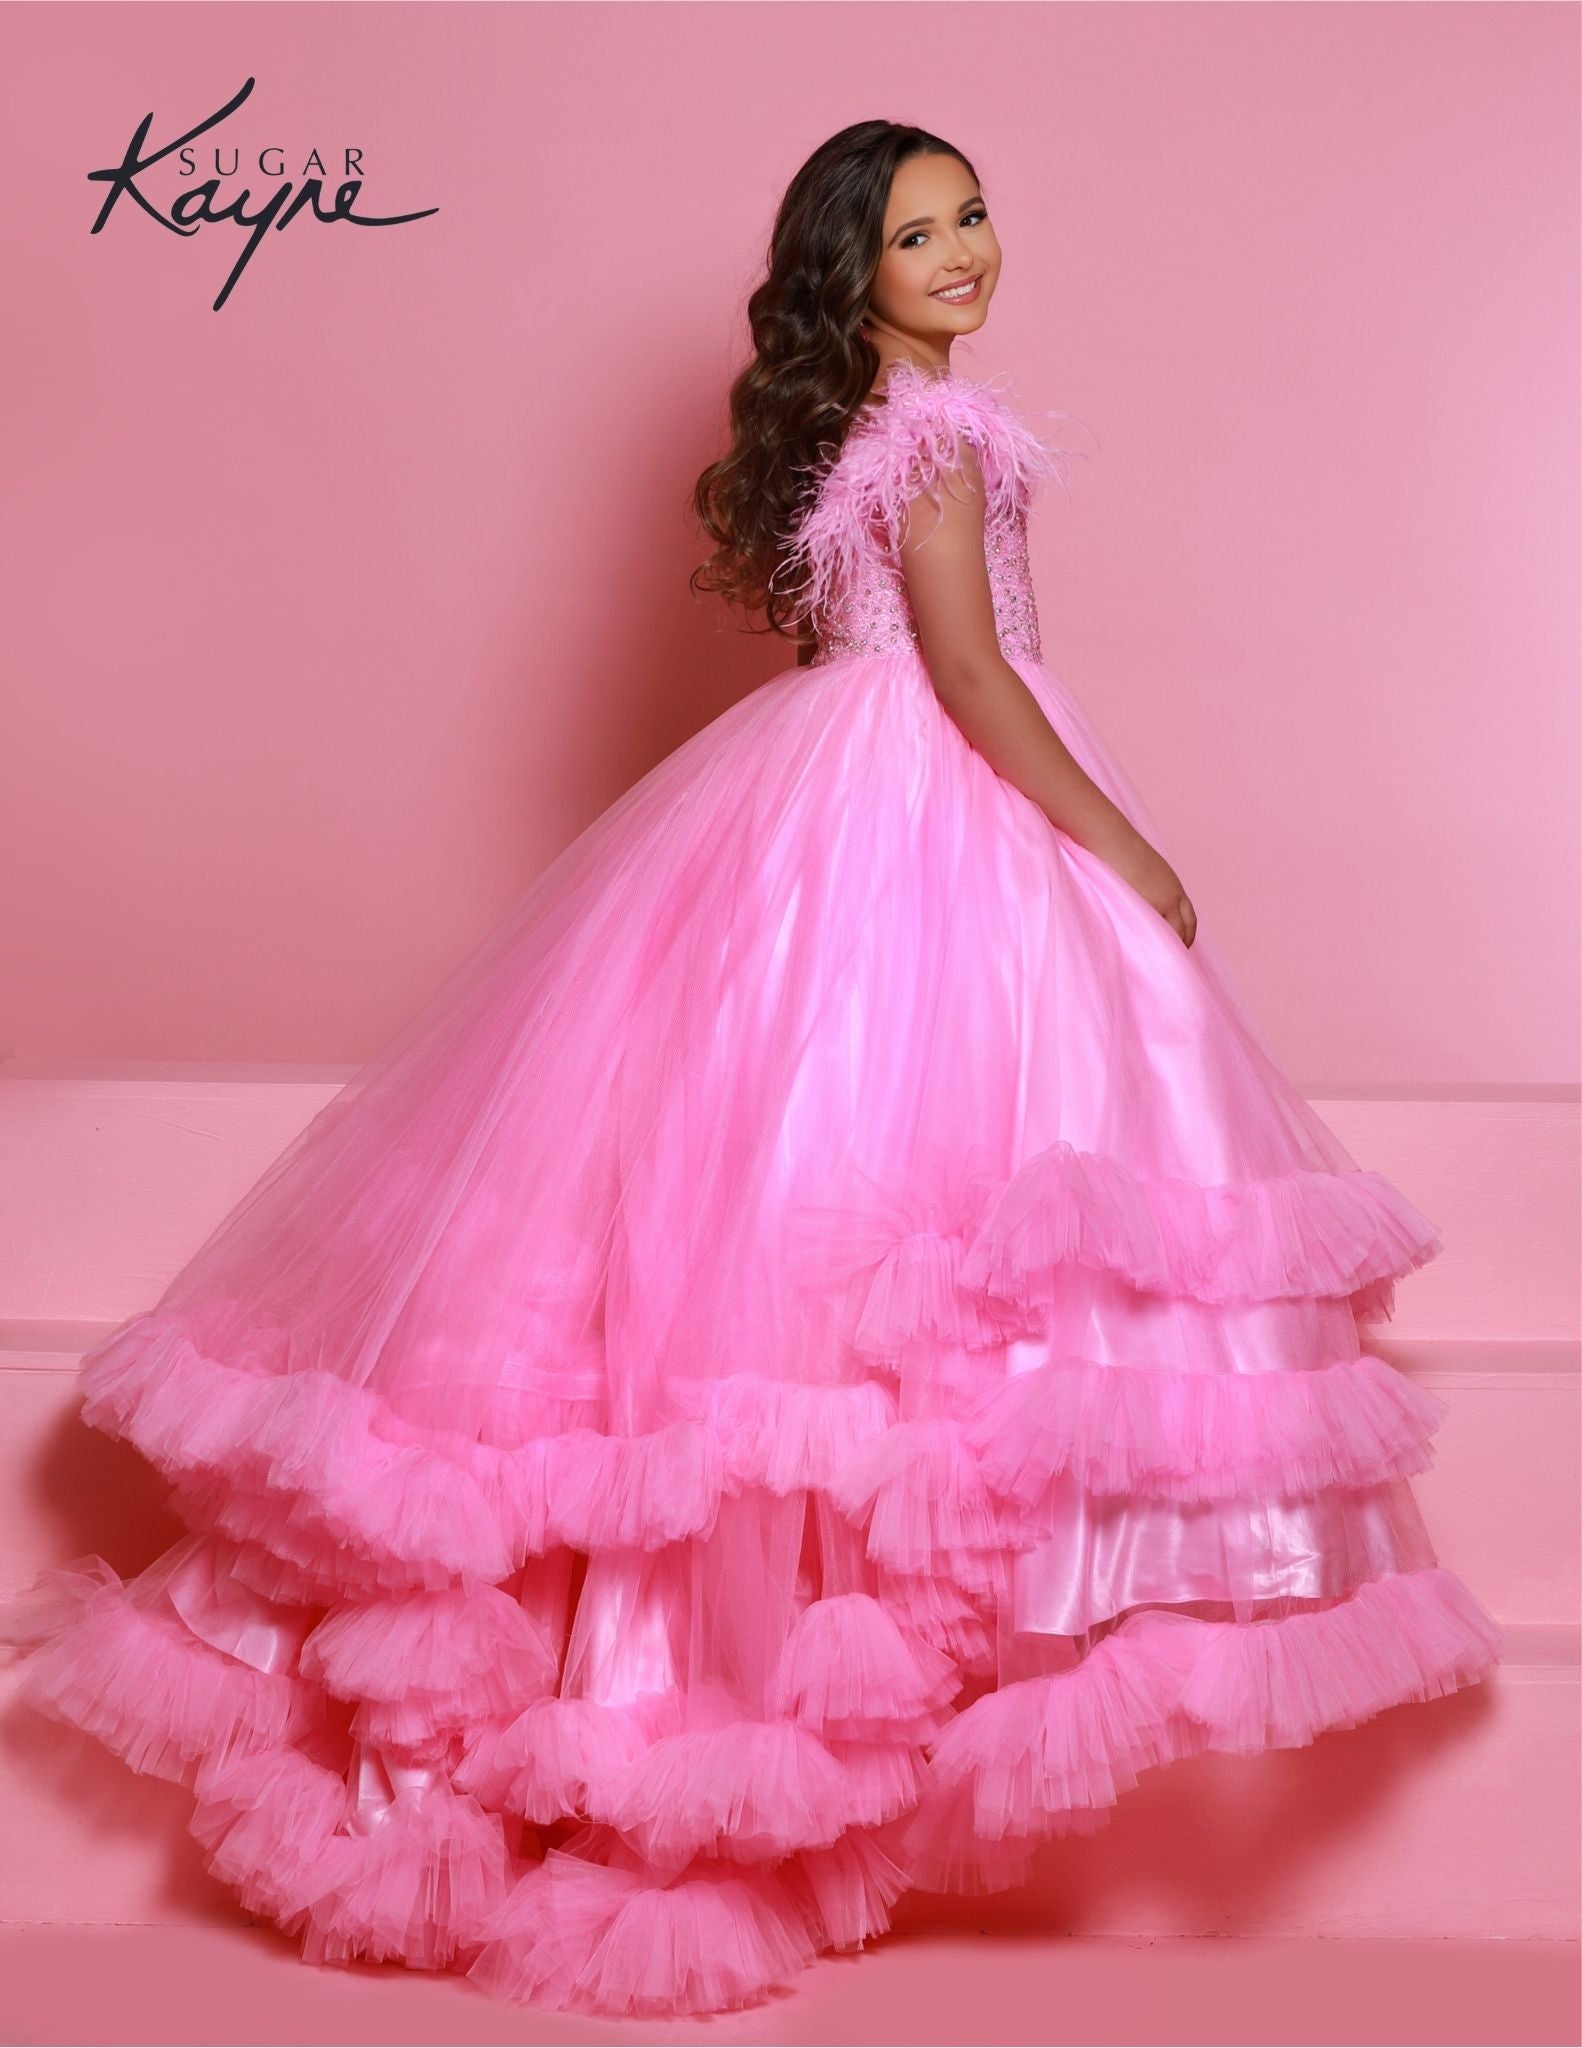 Sugar Kayne C327 features a fashionable bubblegum pageant dress for girls and preteens, complete with feather straps, a tiered ruffle bottom, and a crystal stone bodice.